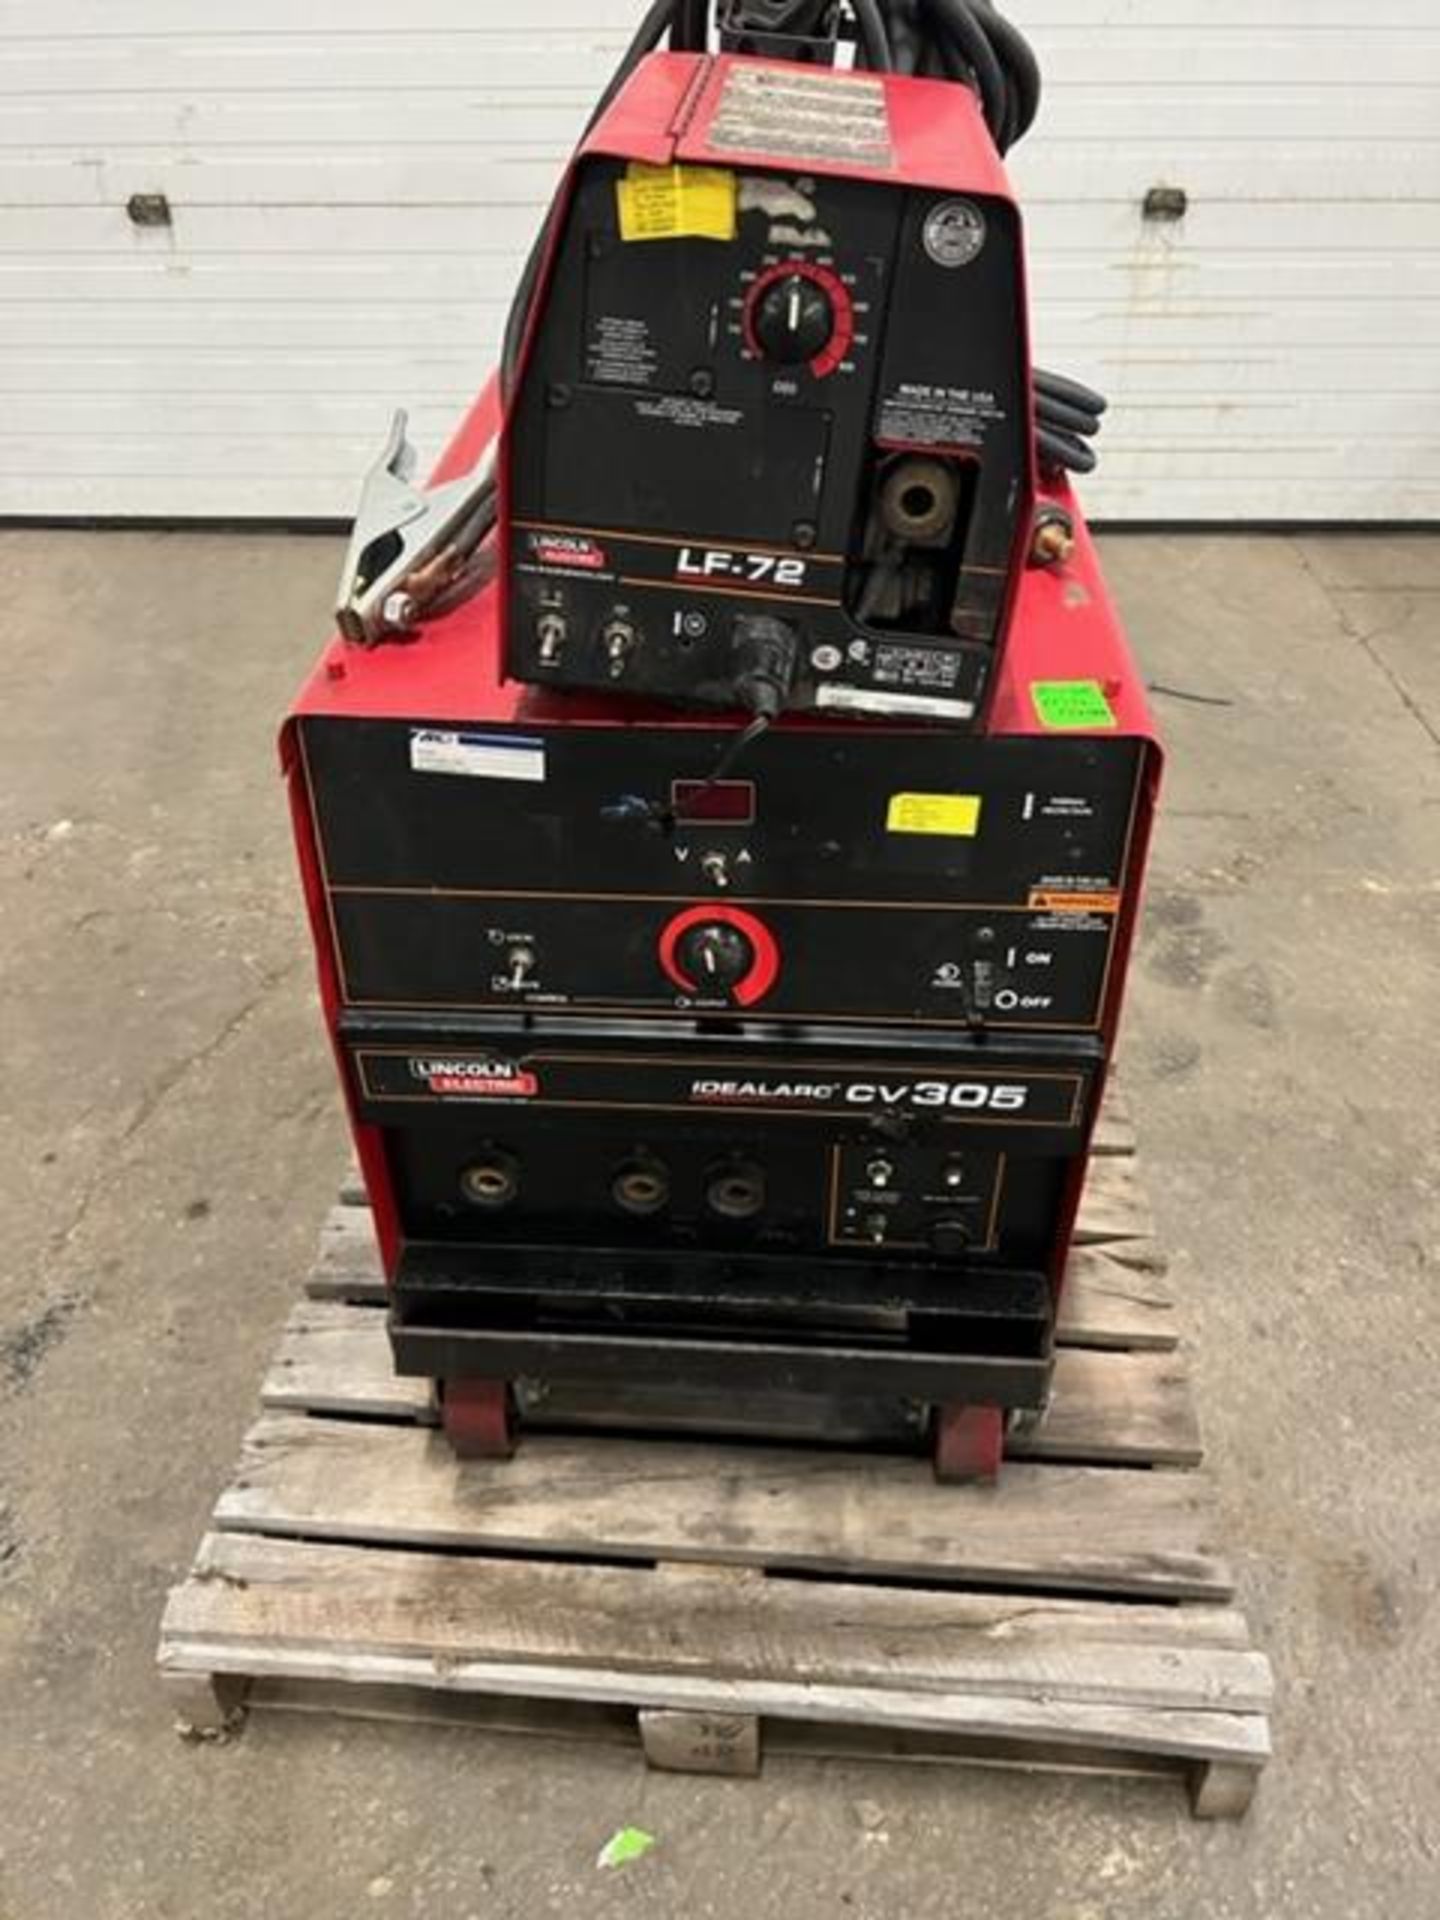 Lincoln CV305 Welder with LF-72 Feeder with Cables Welding Unit 208/230/460V - Image 2 of 3